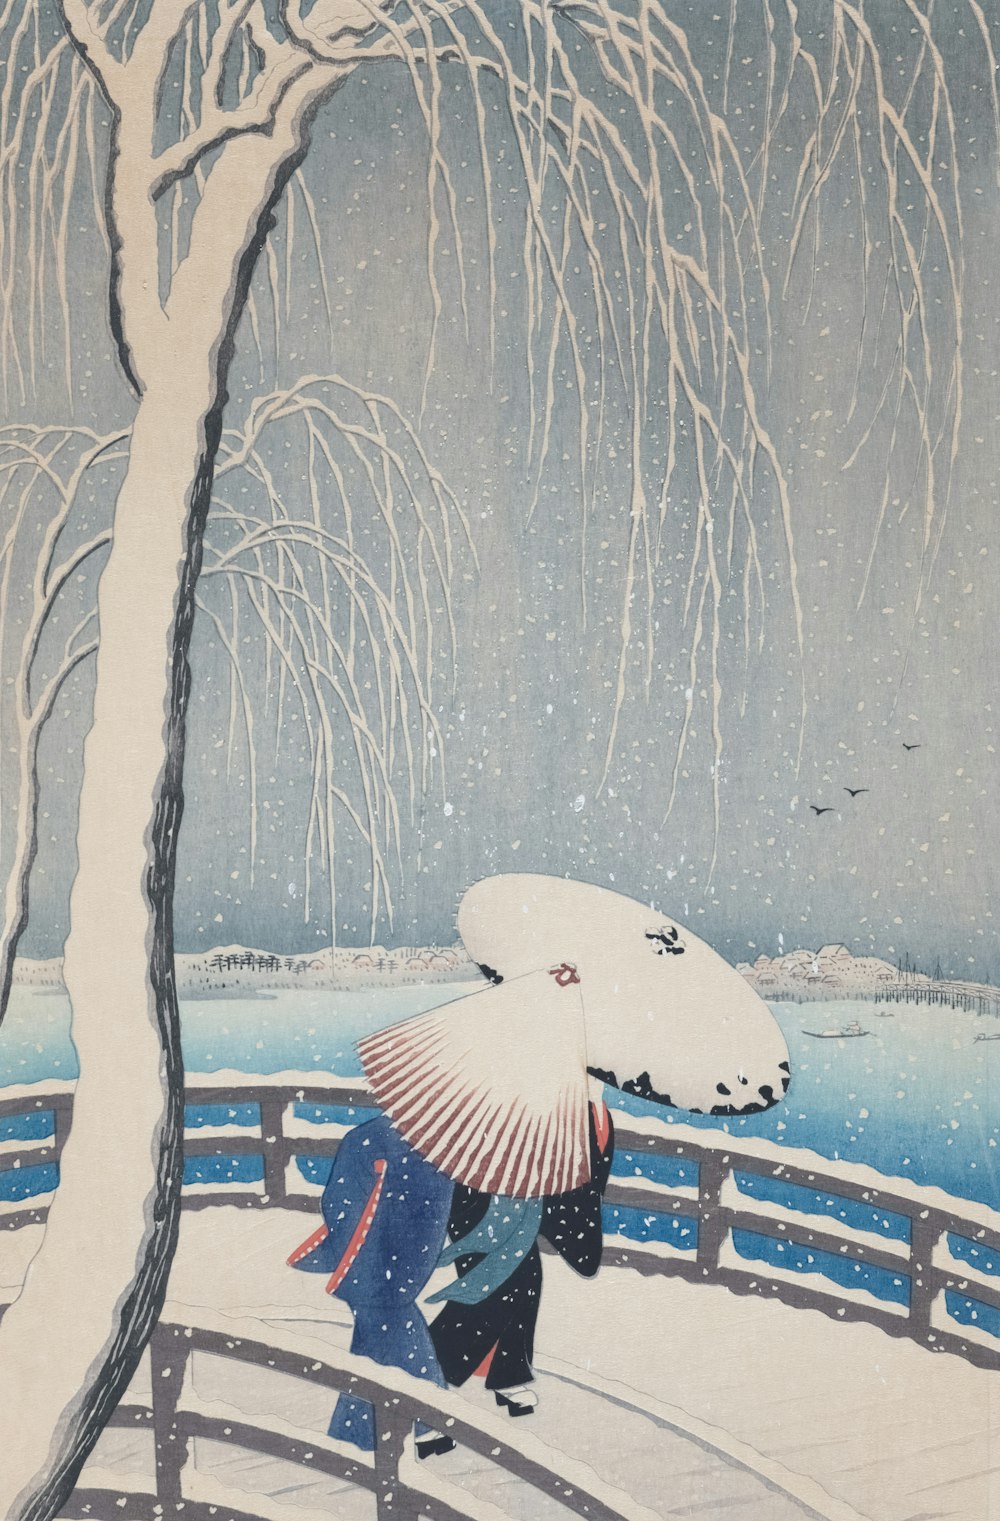 a painting of a woman holding an umbrella in the snow